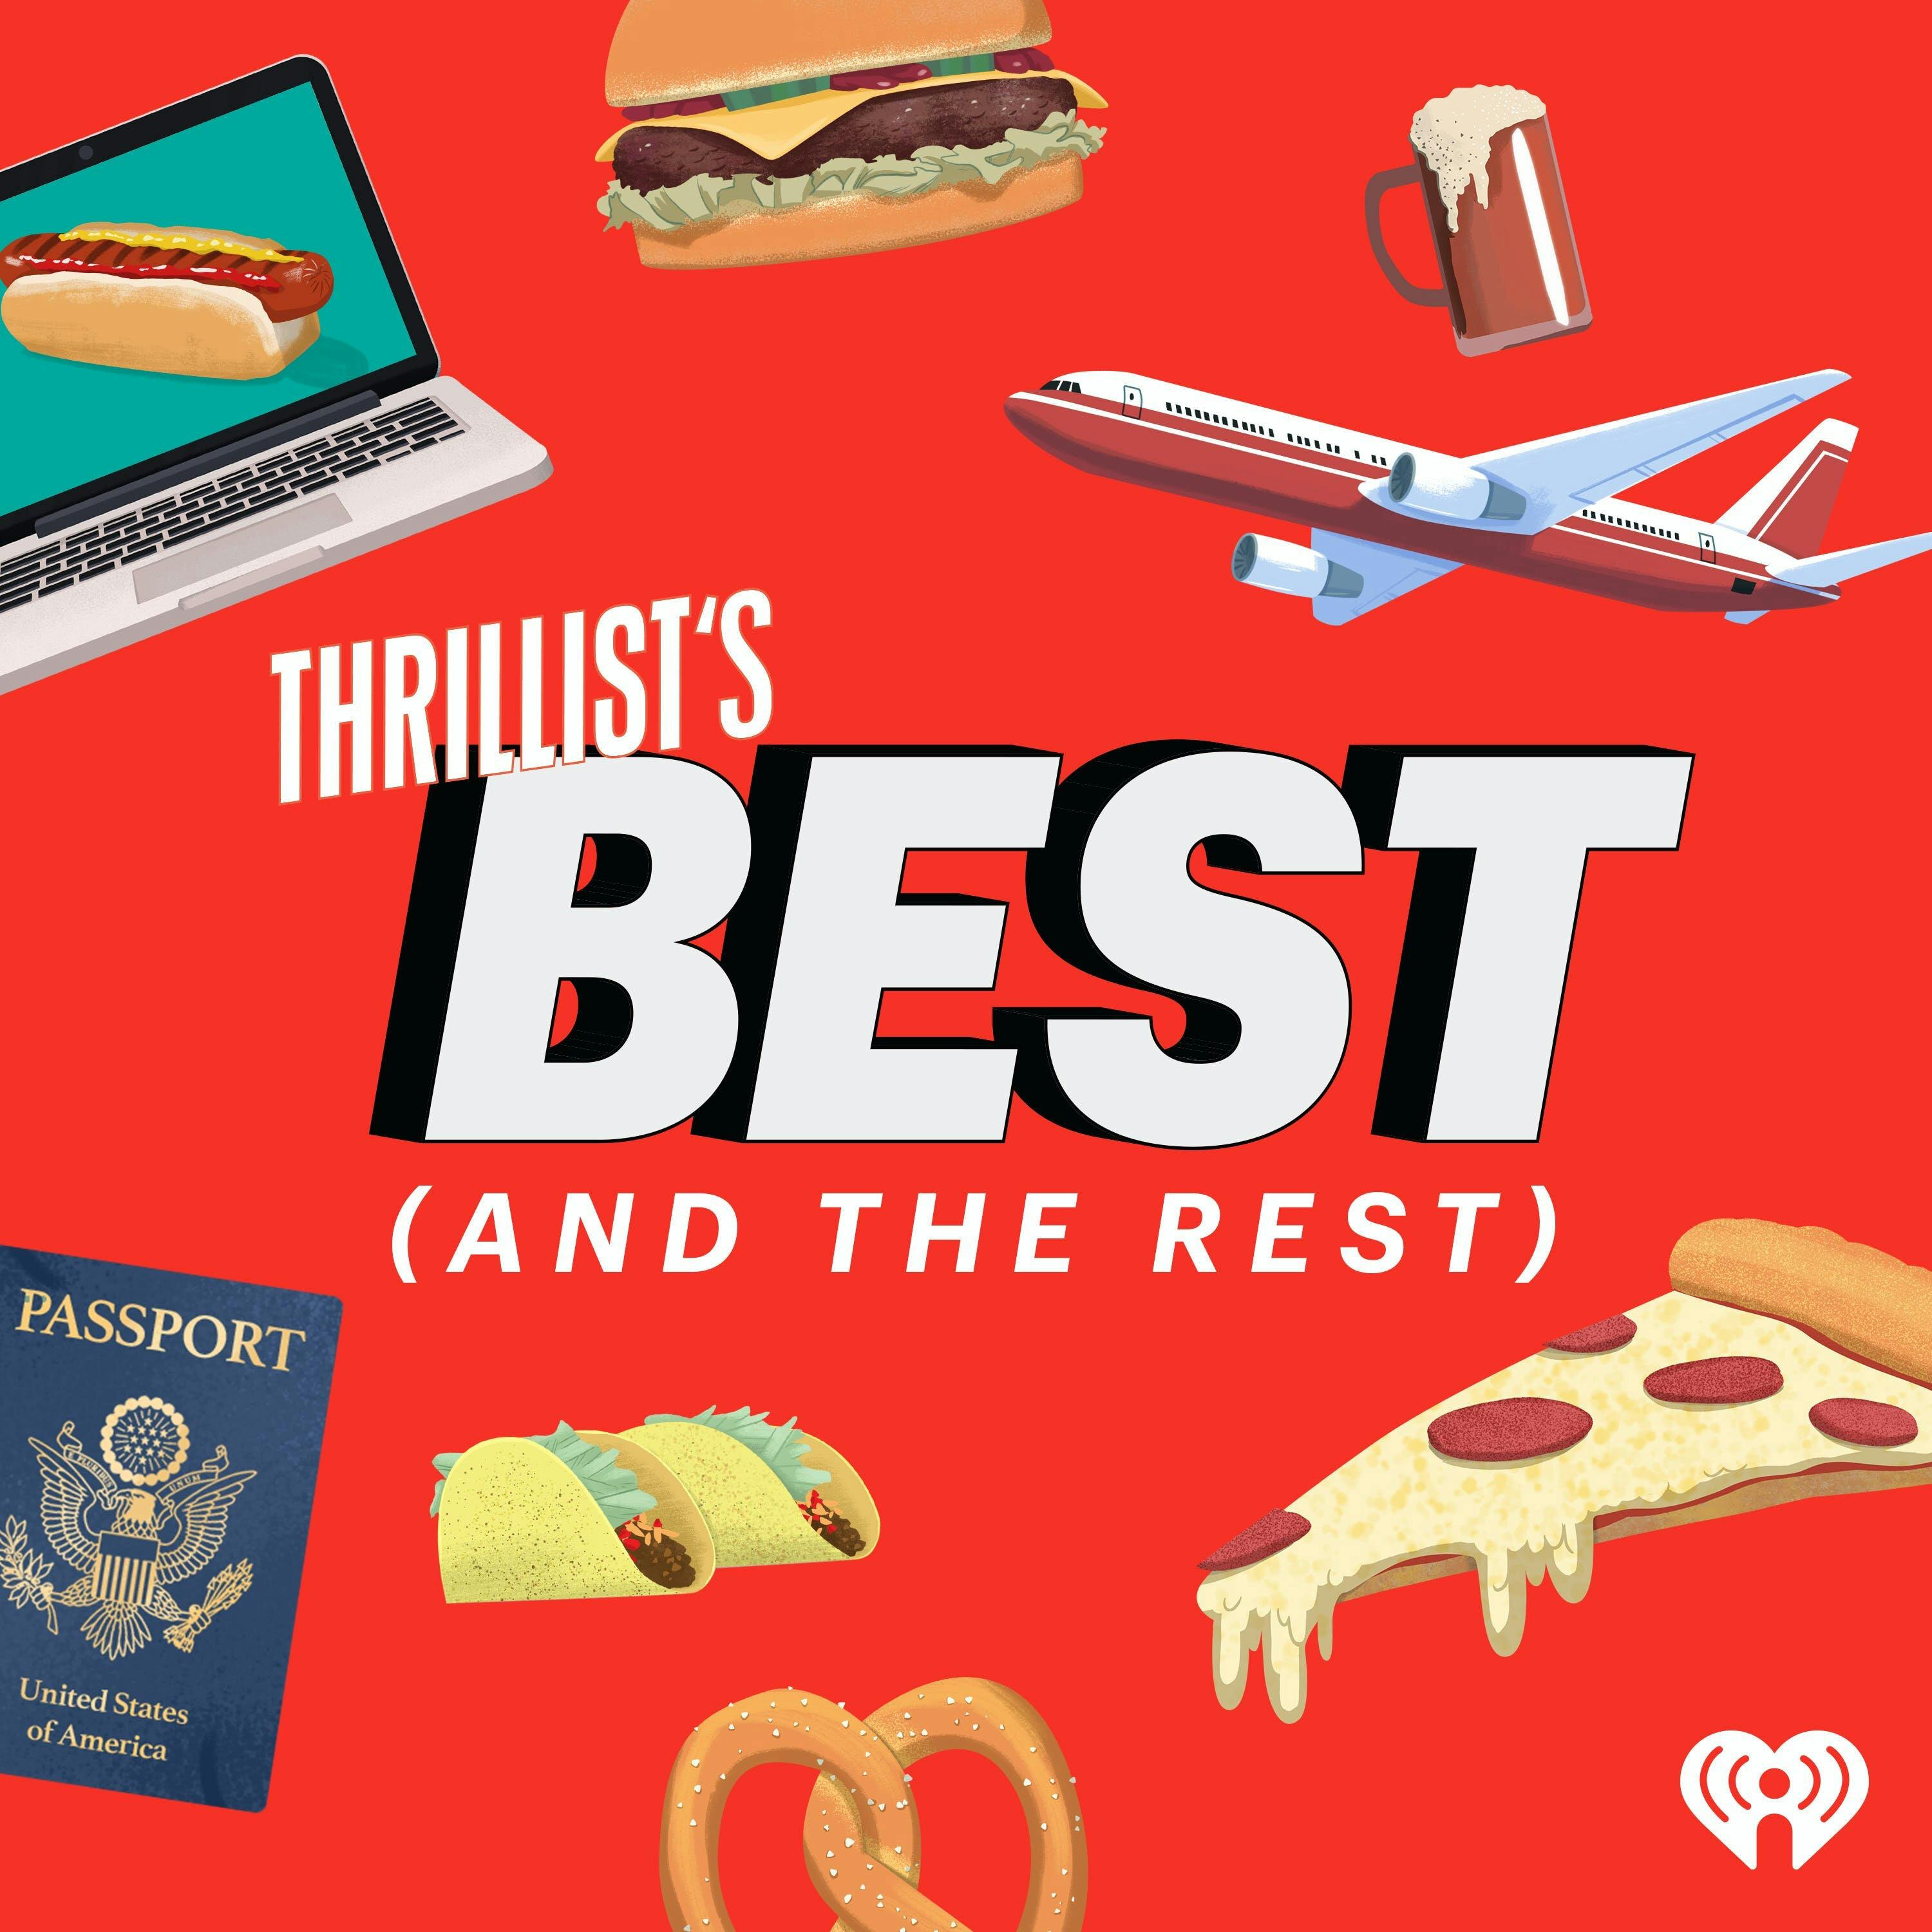 THRILLIST'S BEST: How Covid-19 Will Change the Way We Travel